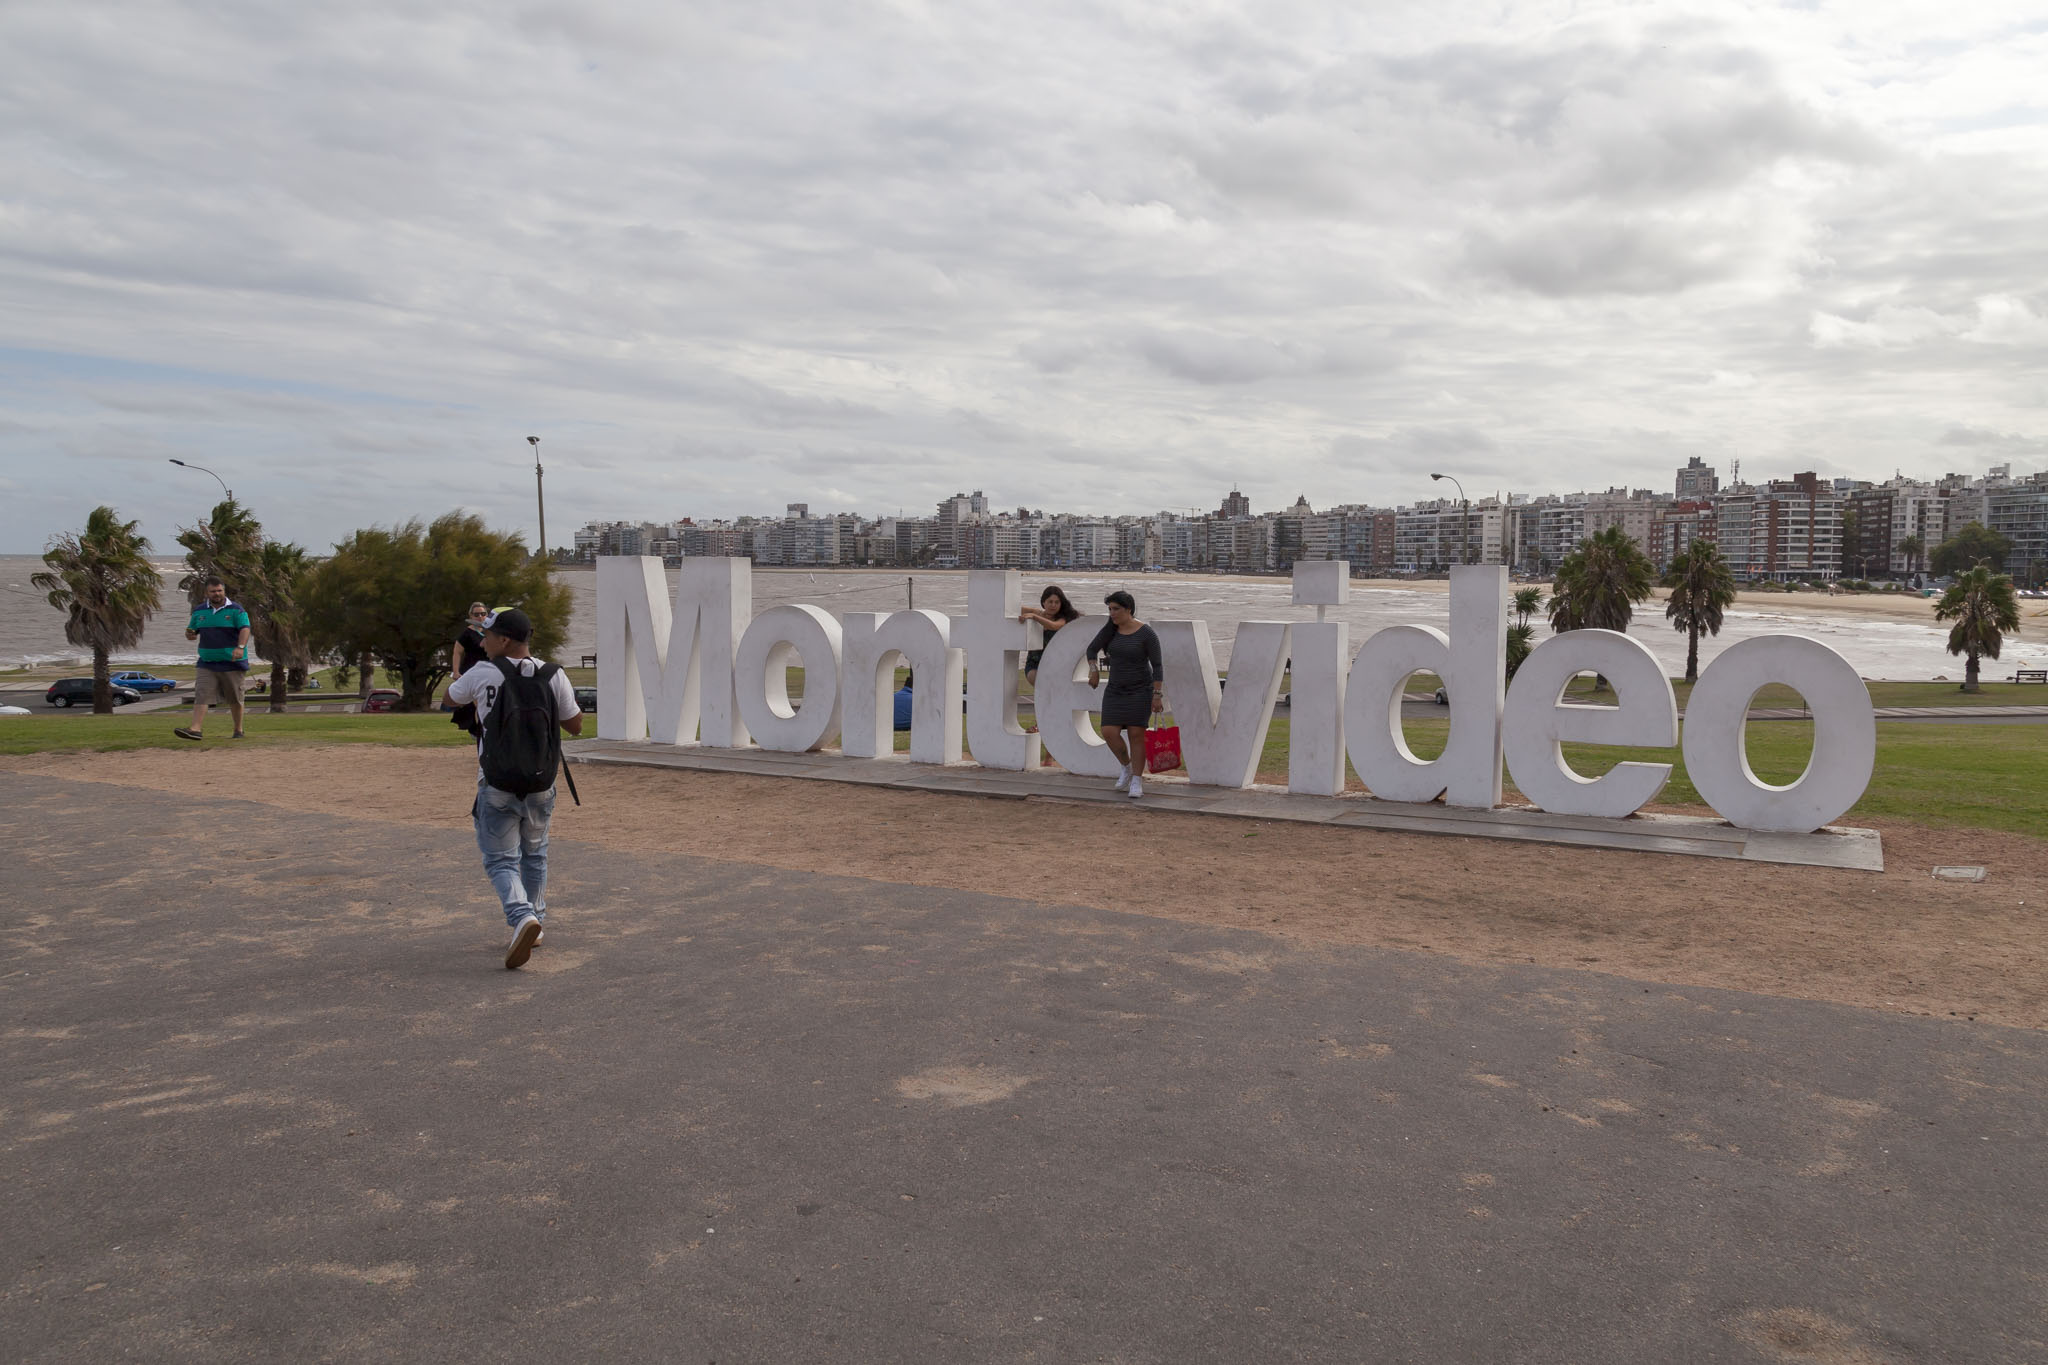 Montevideo Sign